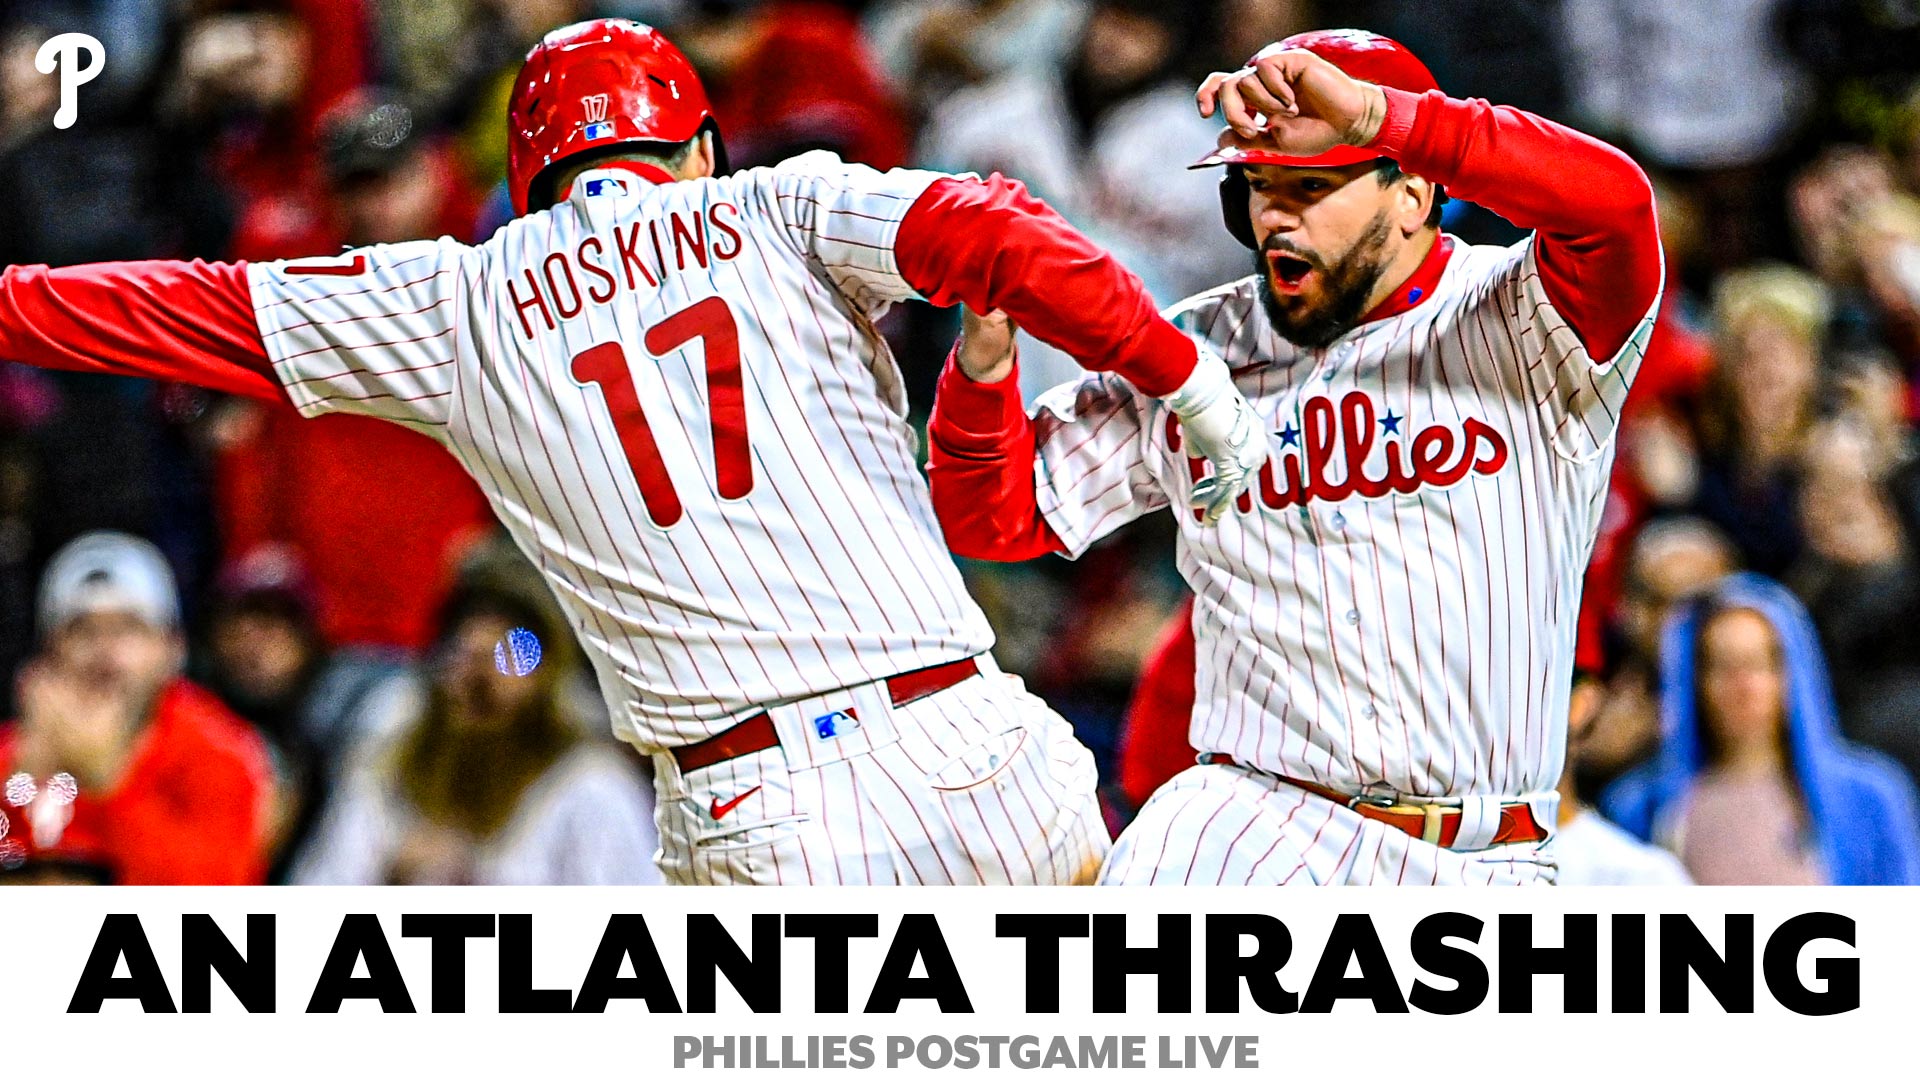 Hoskins, Nola Lead Phillies to CRUSH Braves for Third Straight Win Phillies Postgame Live